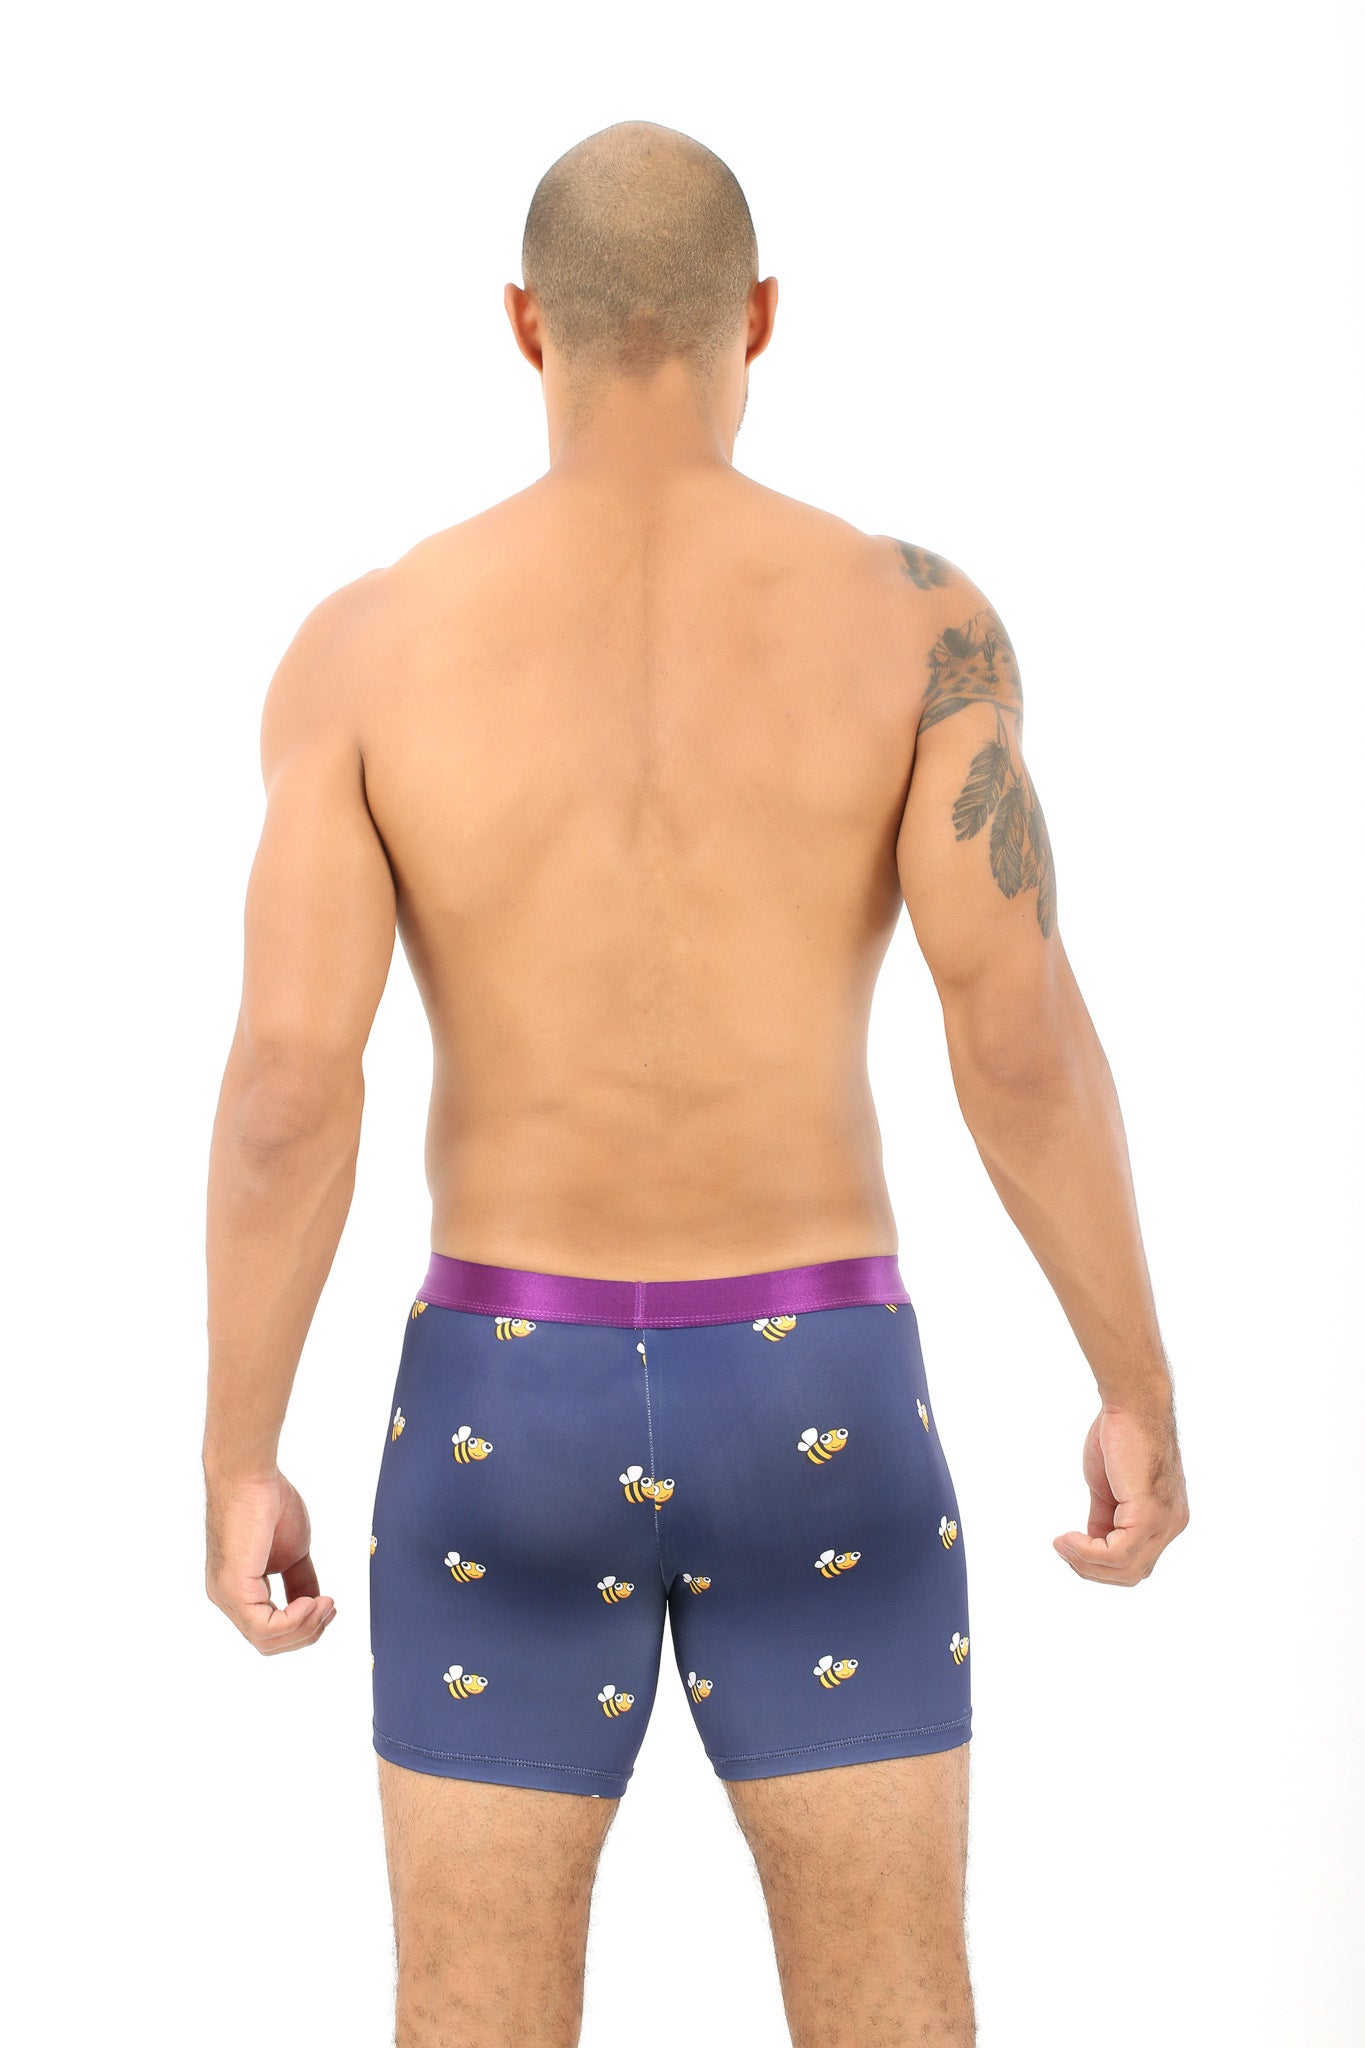 The back of a man wearing Bee Underwear boxer briefs.